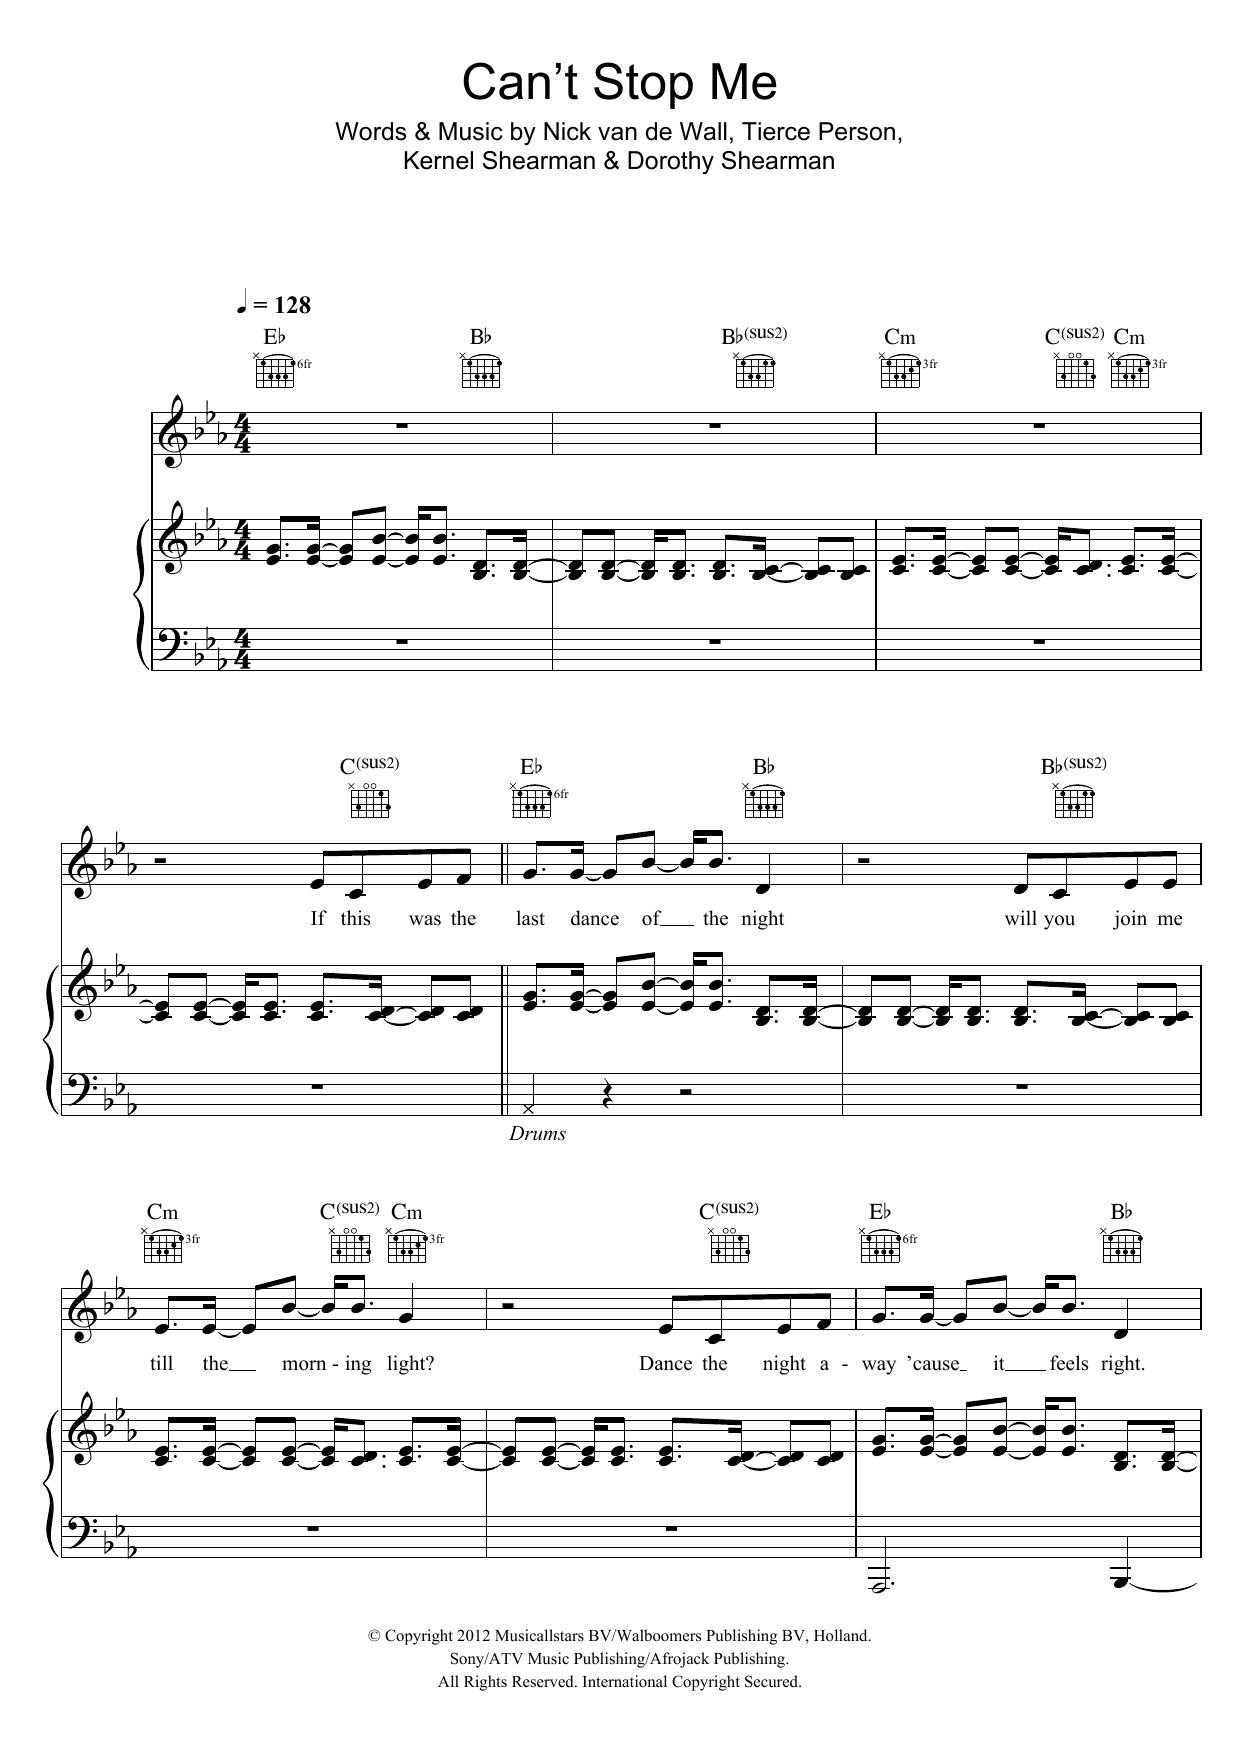 Download Afrojack Can't Stop Me Sheet Music